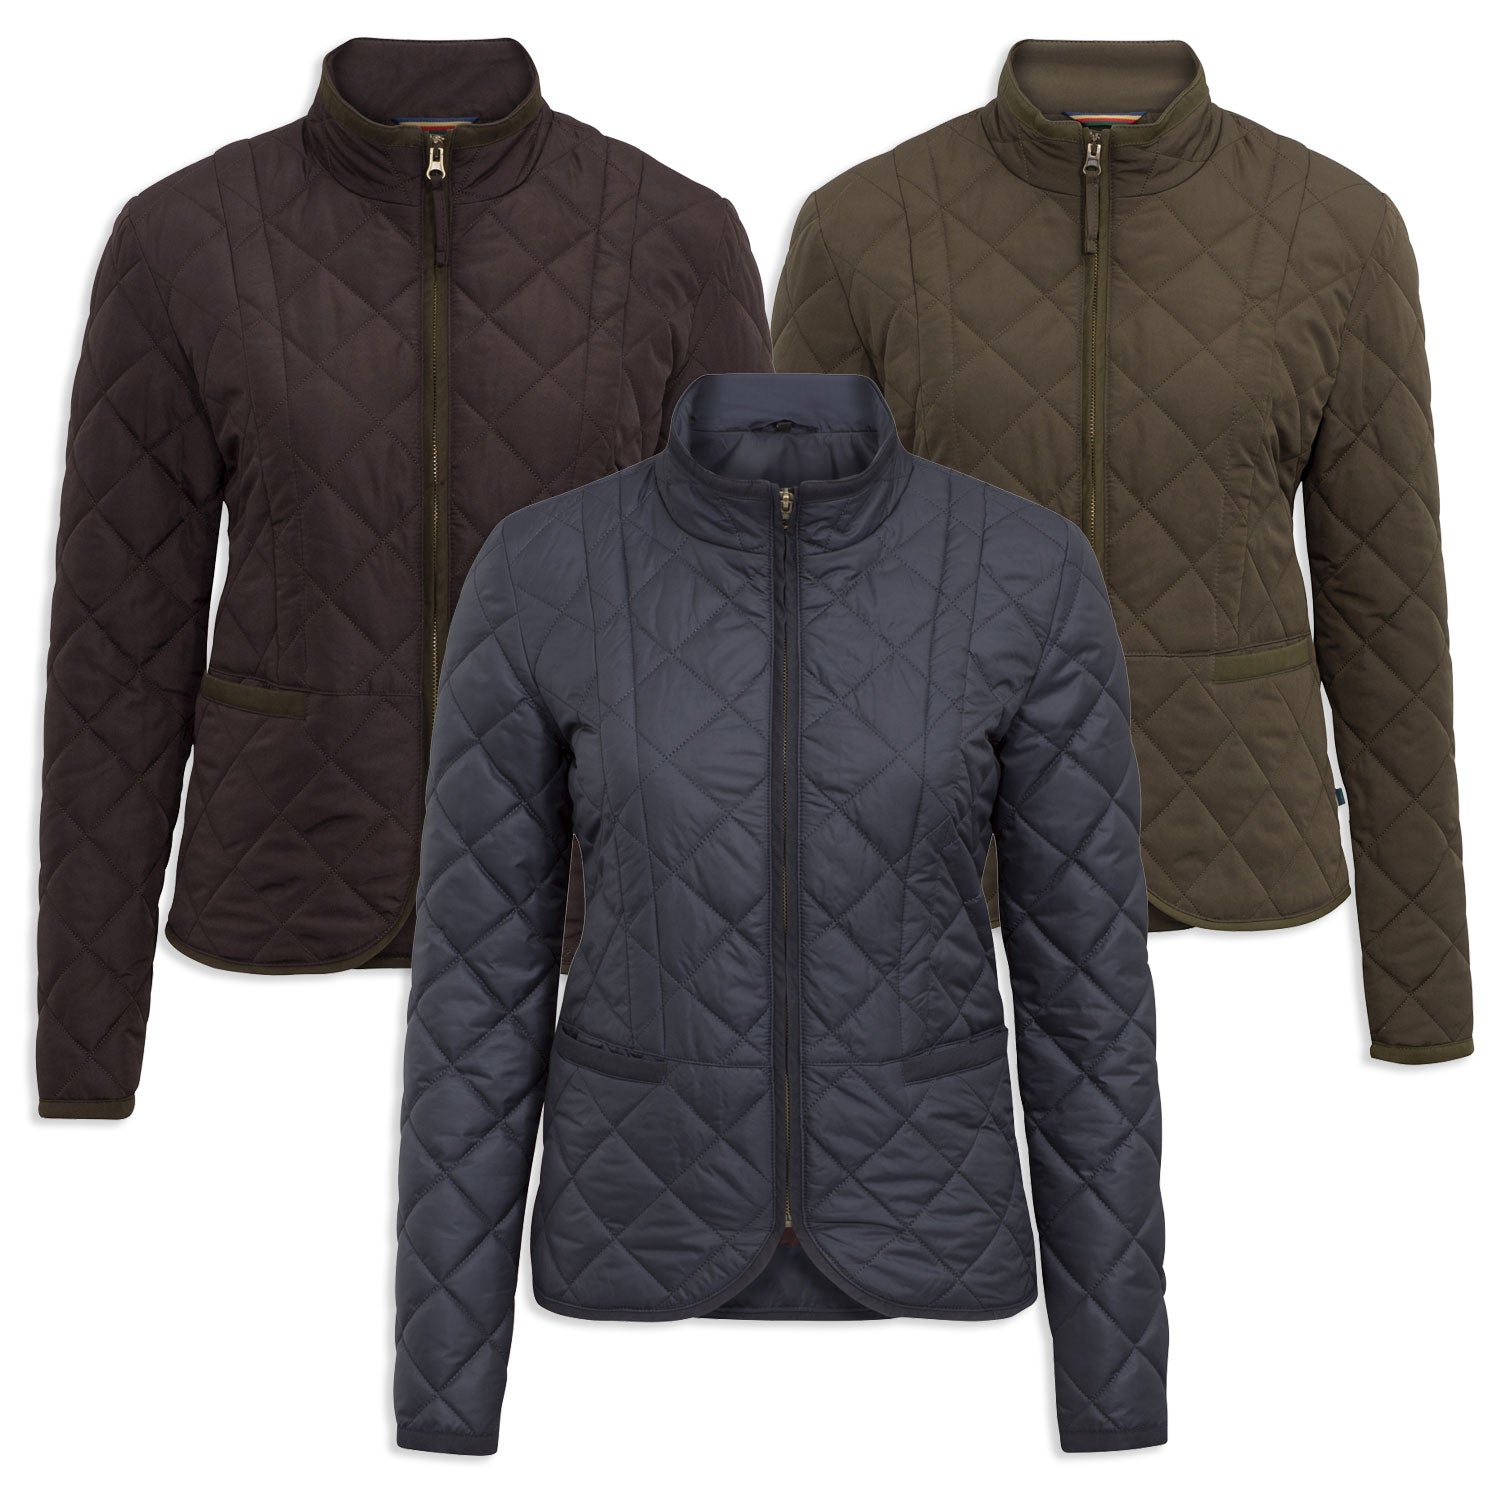 Alan Paine Surrey Quilted Jacket | Olive, Navy, Peat